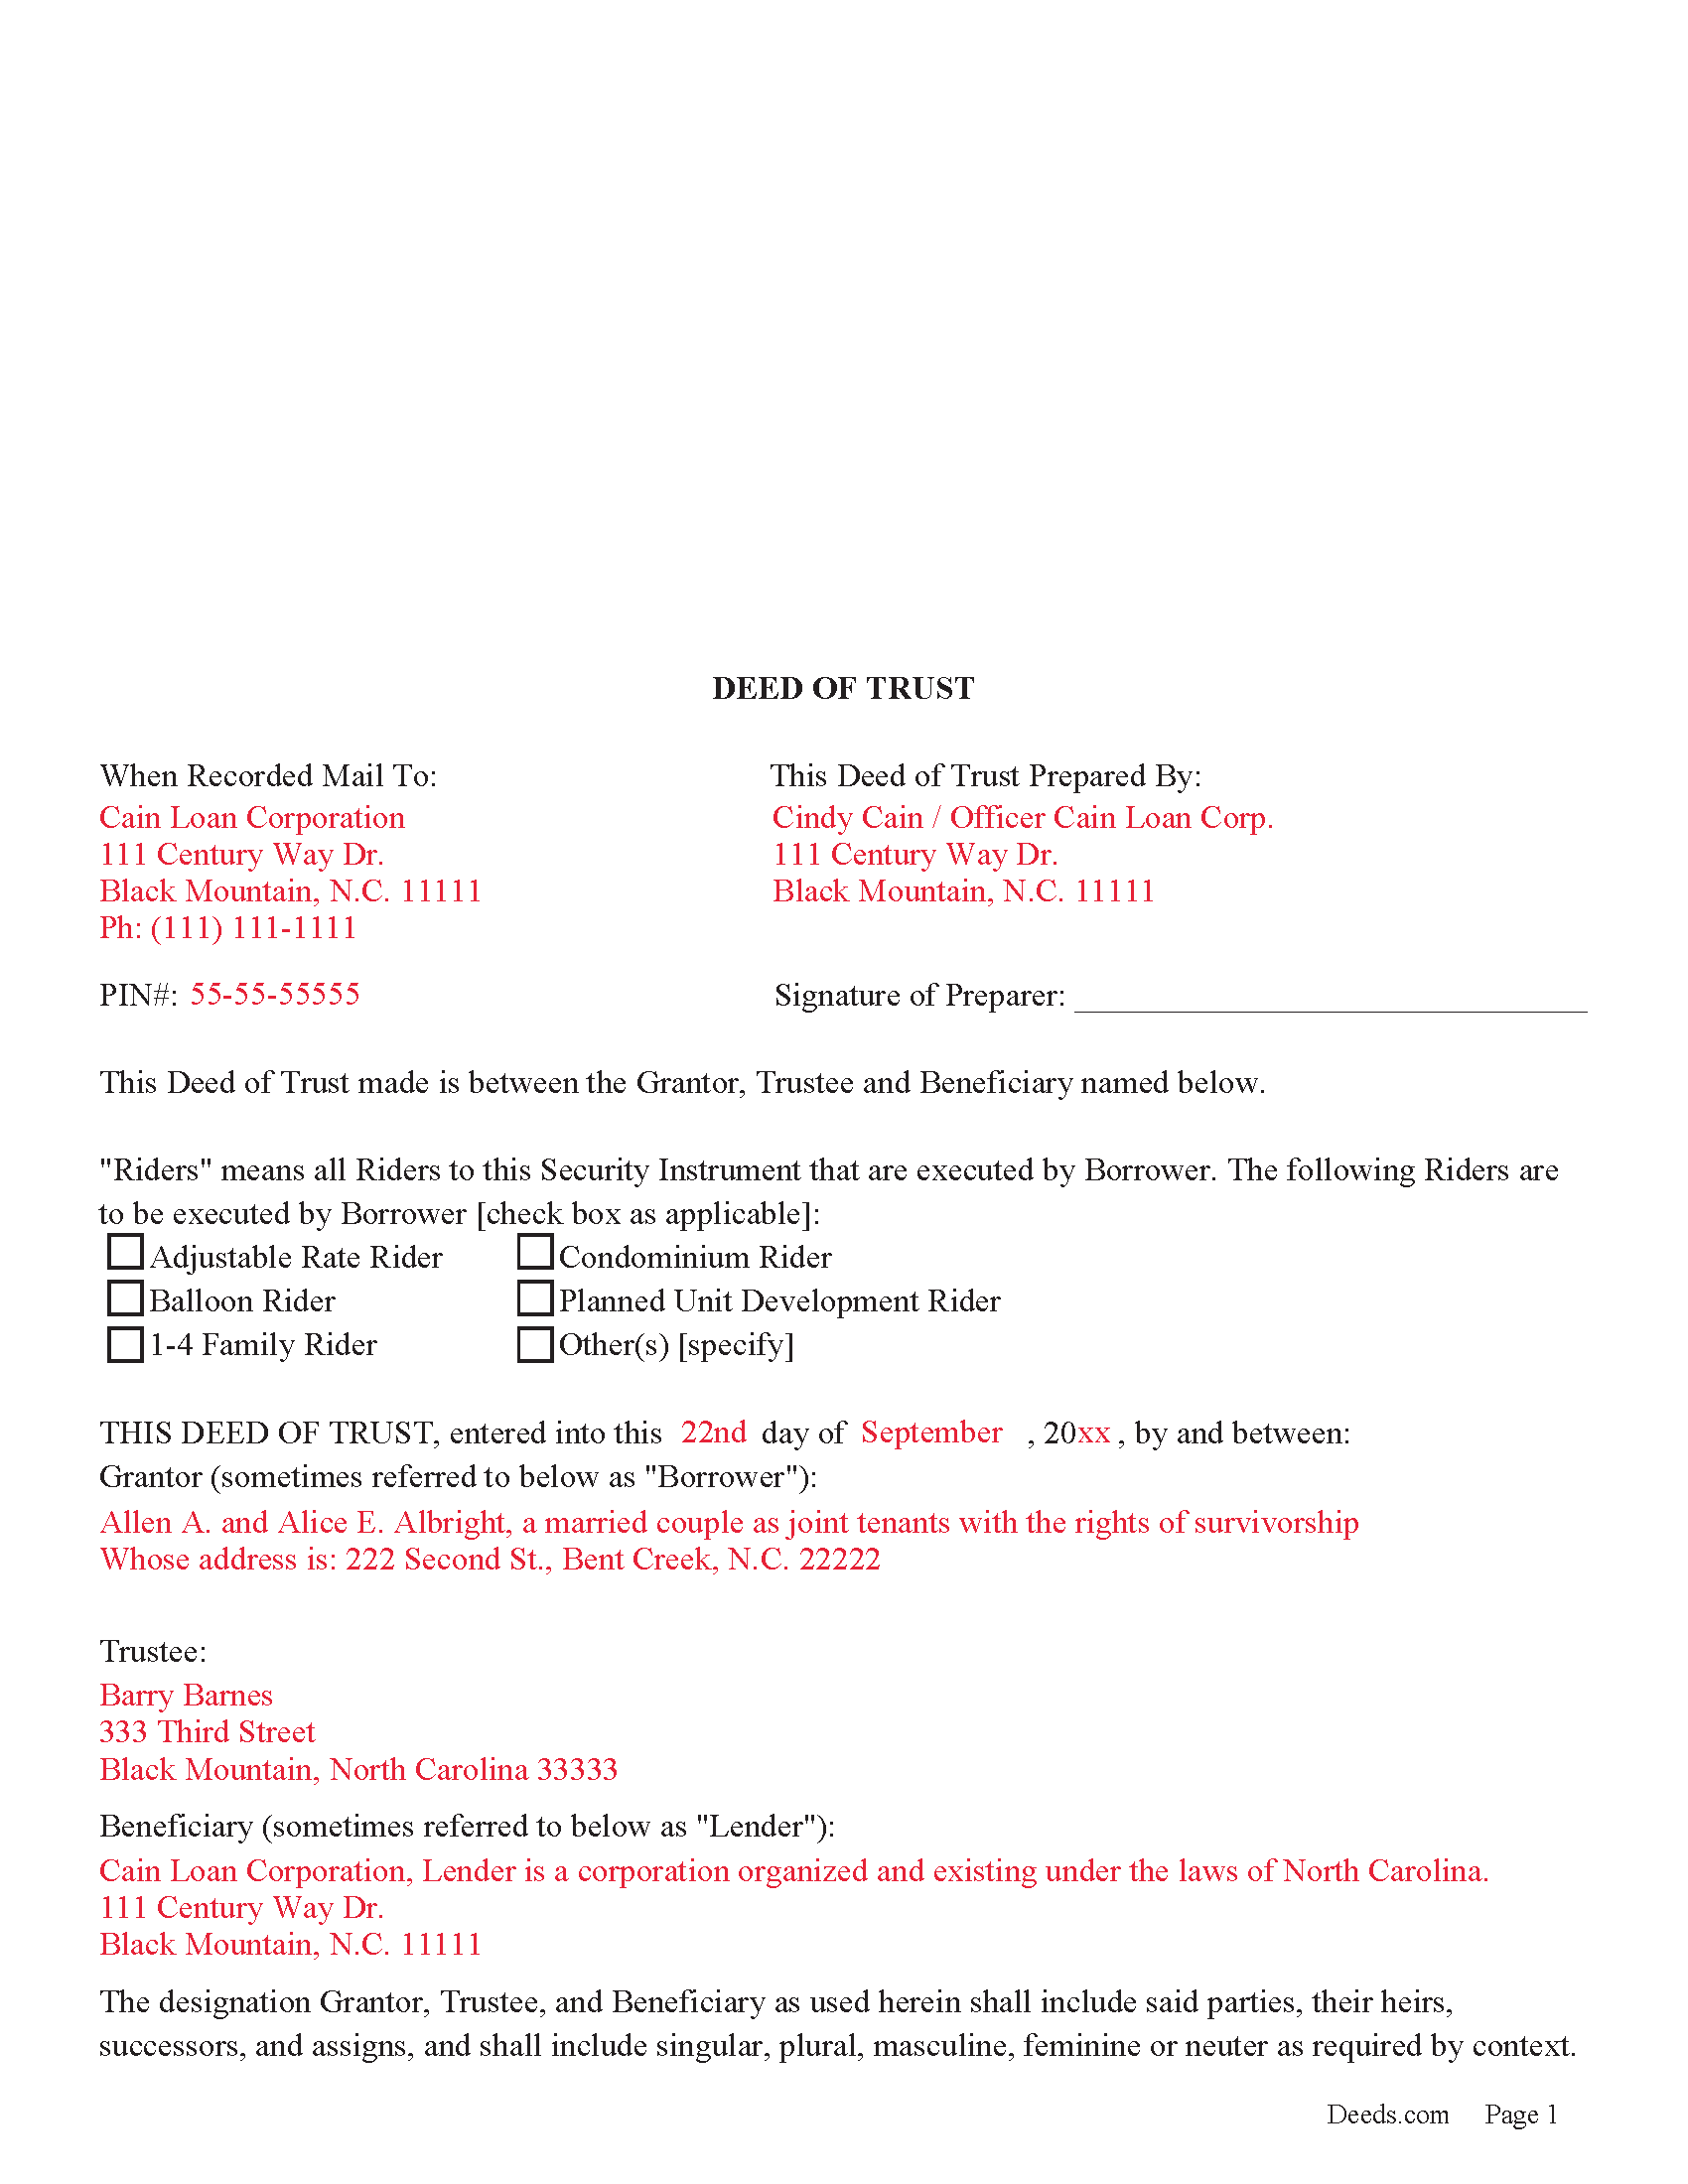 Completed Example of the Deed of Trust Document